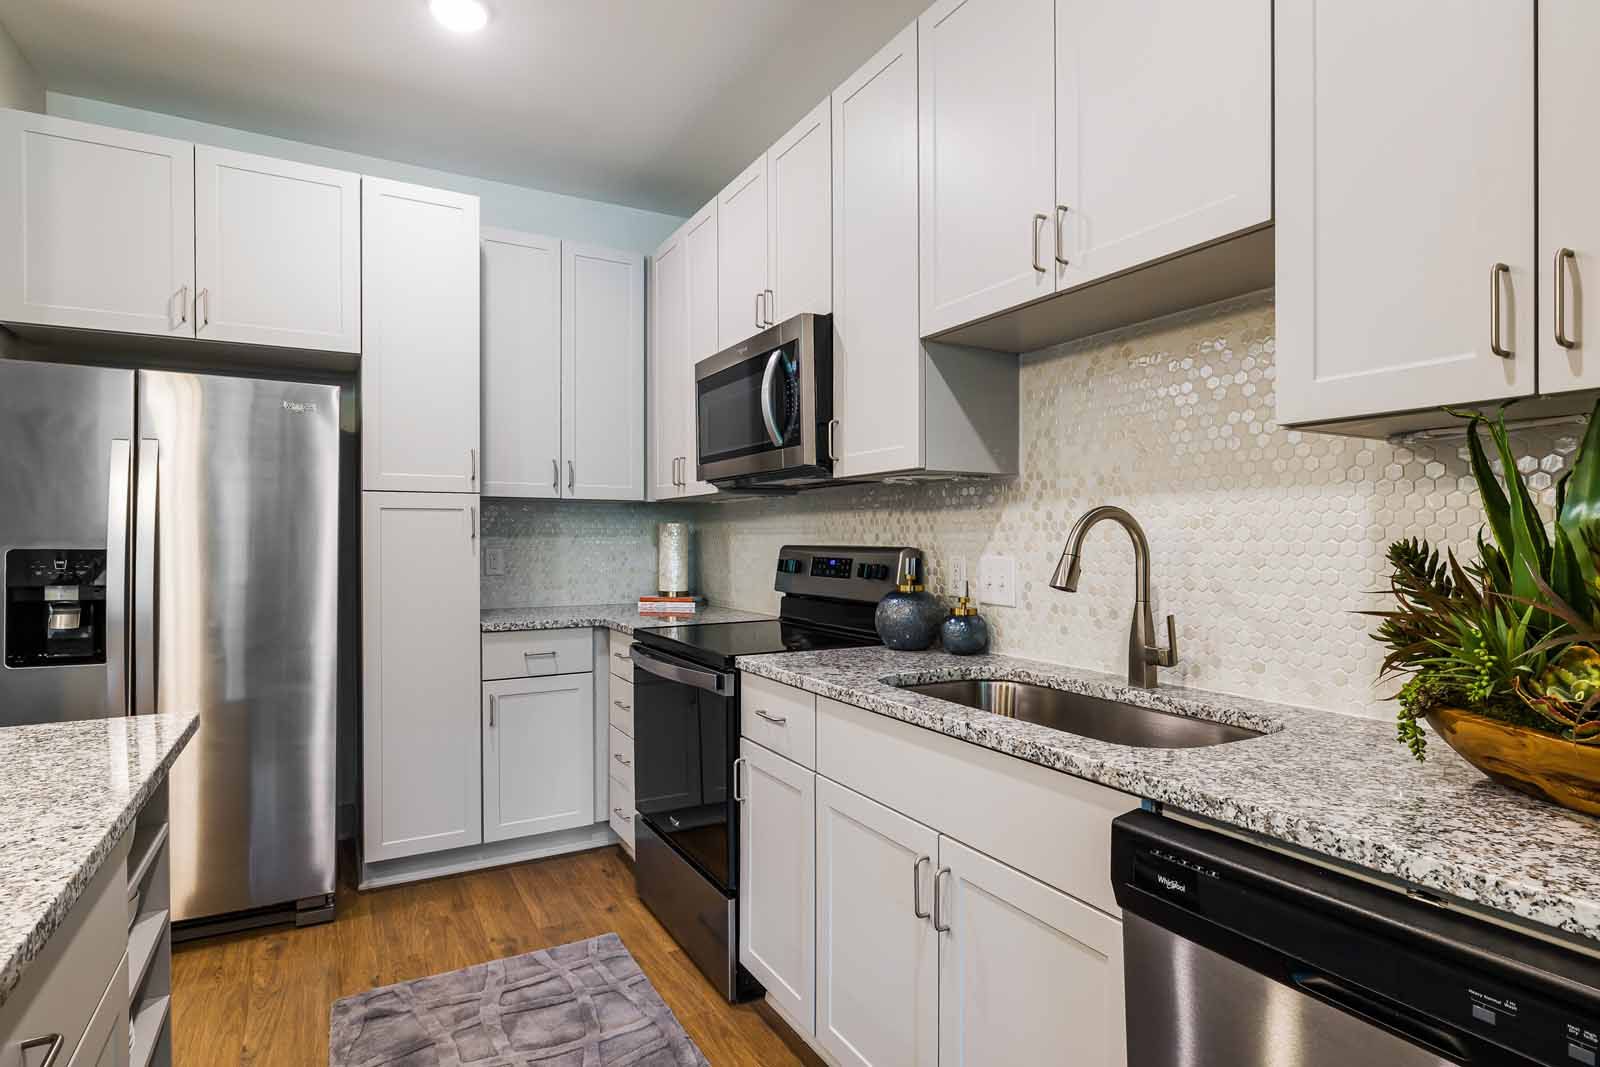 Kitchen with white cabinetry and stainless steel appliances